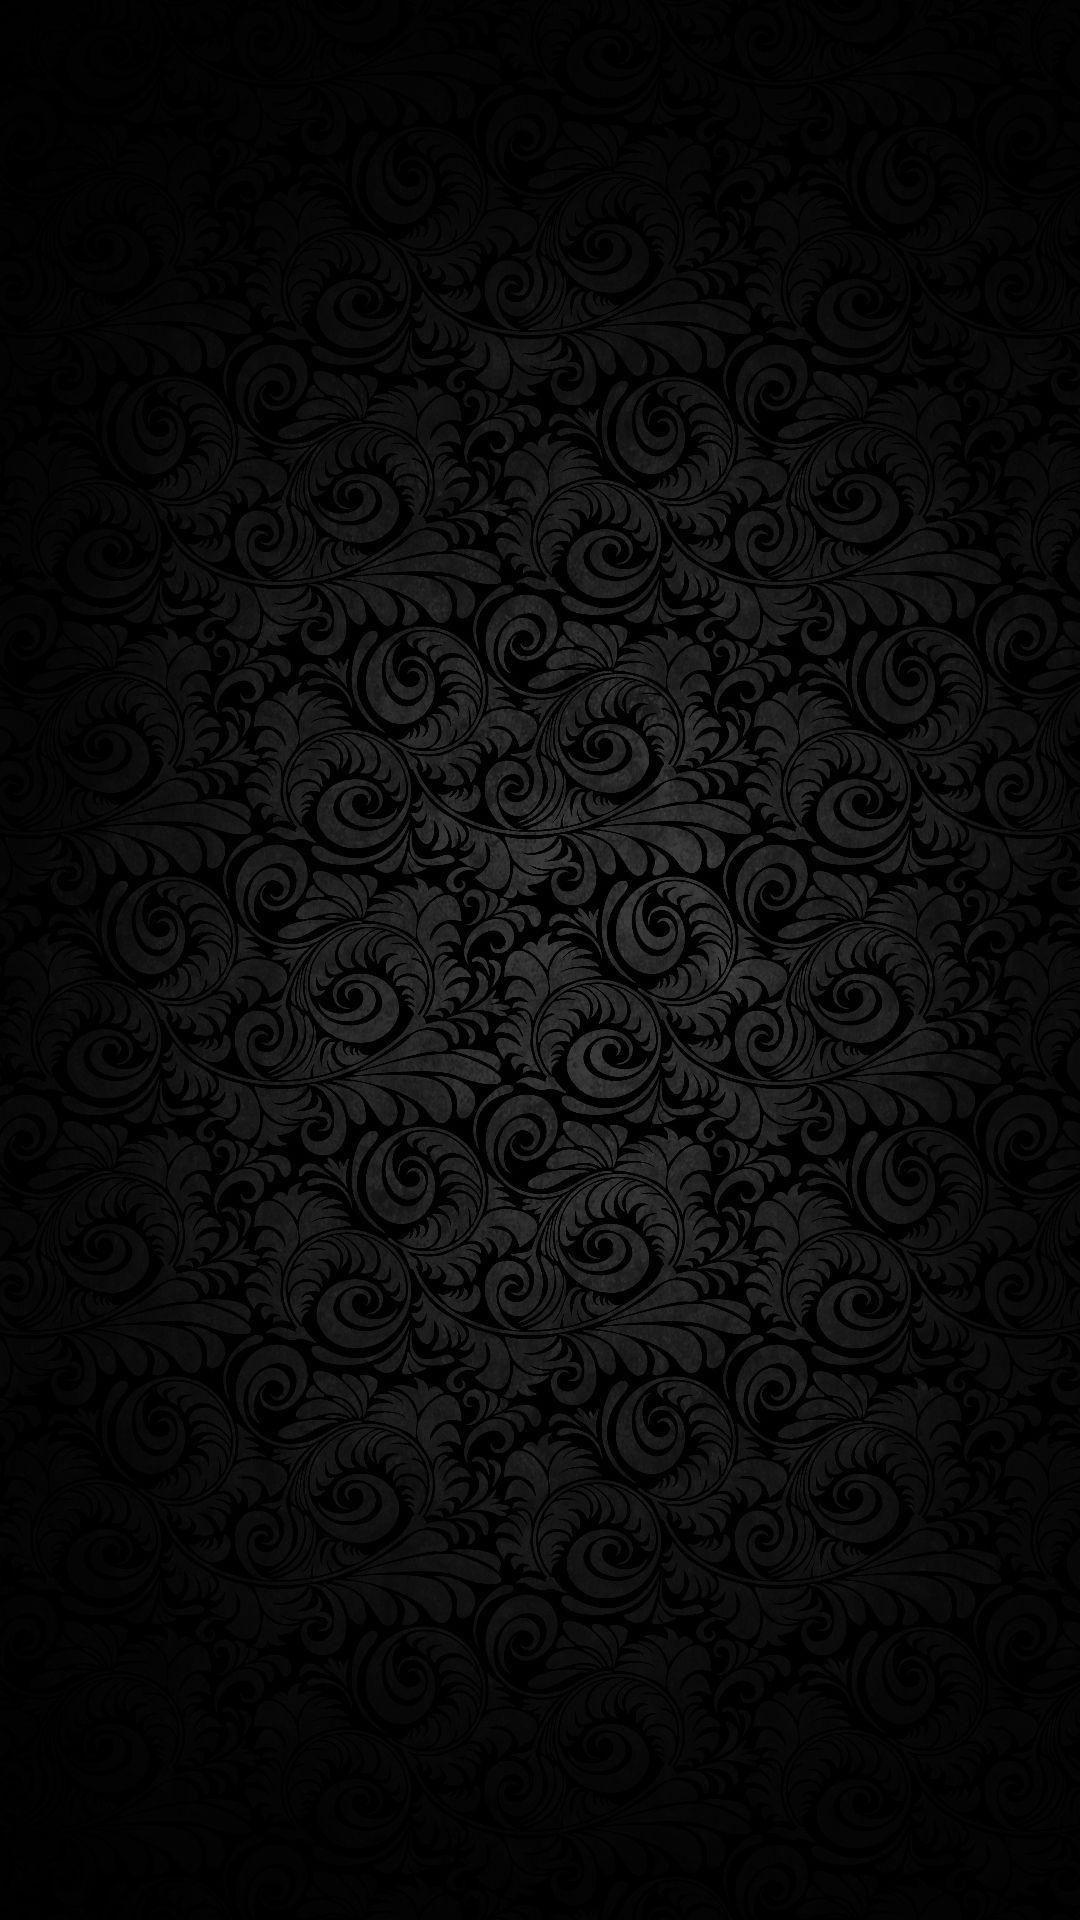 wallpaper. Wallpaper with abstract designs and textures. 3D